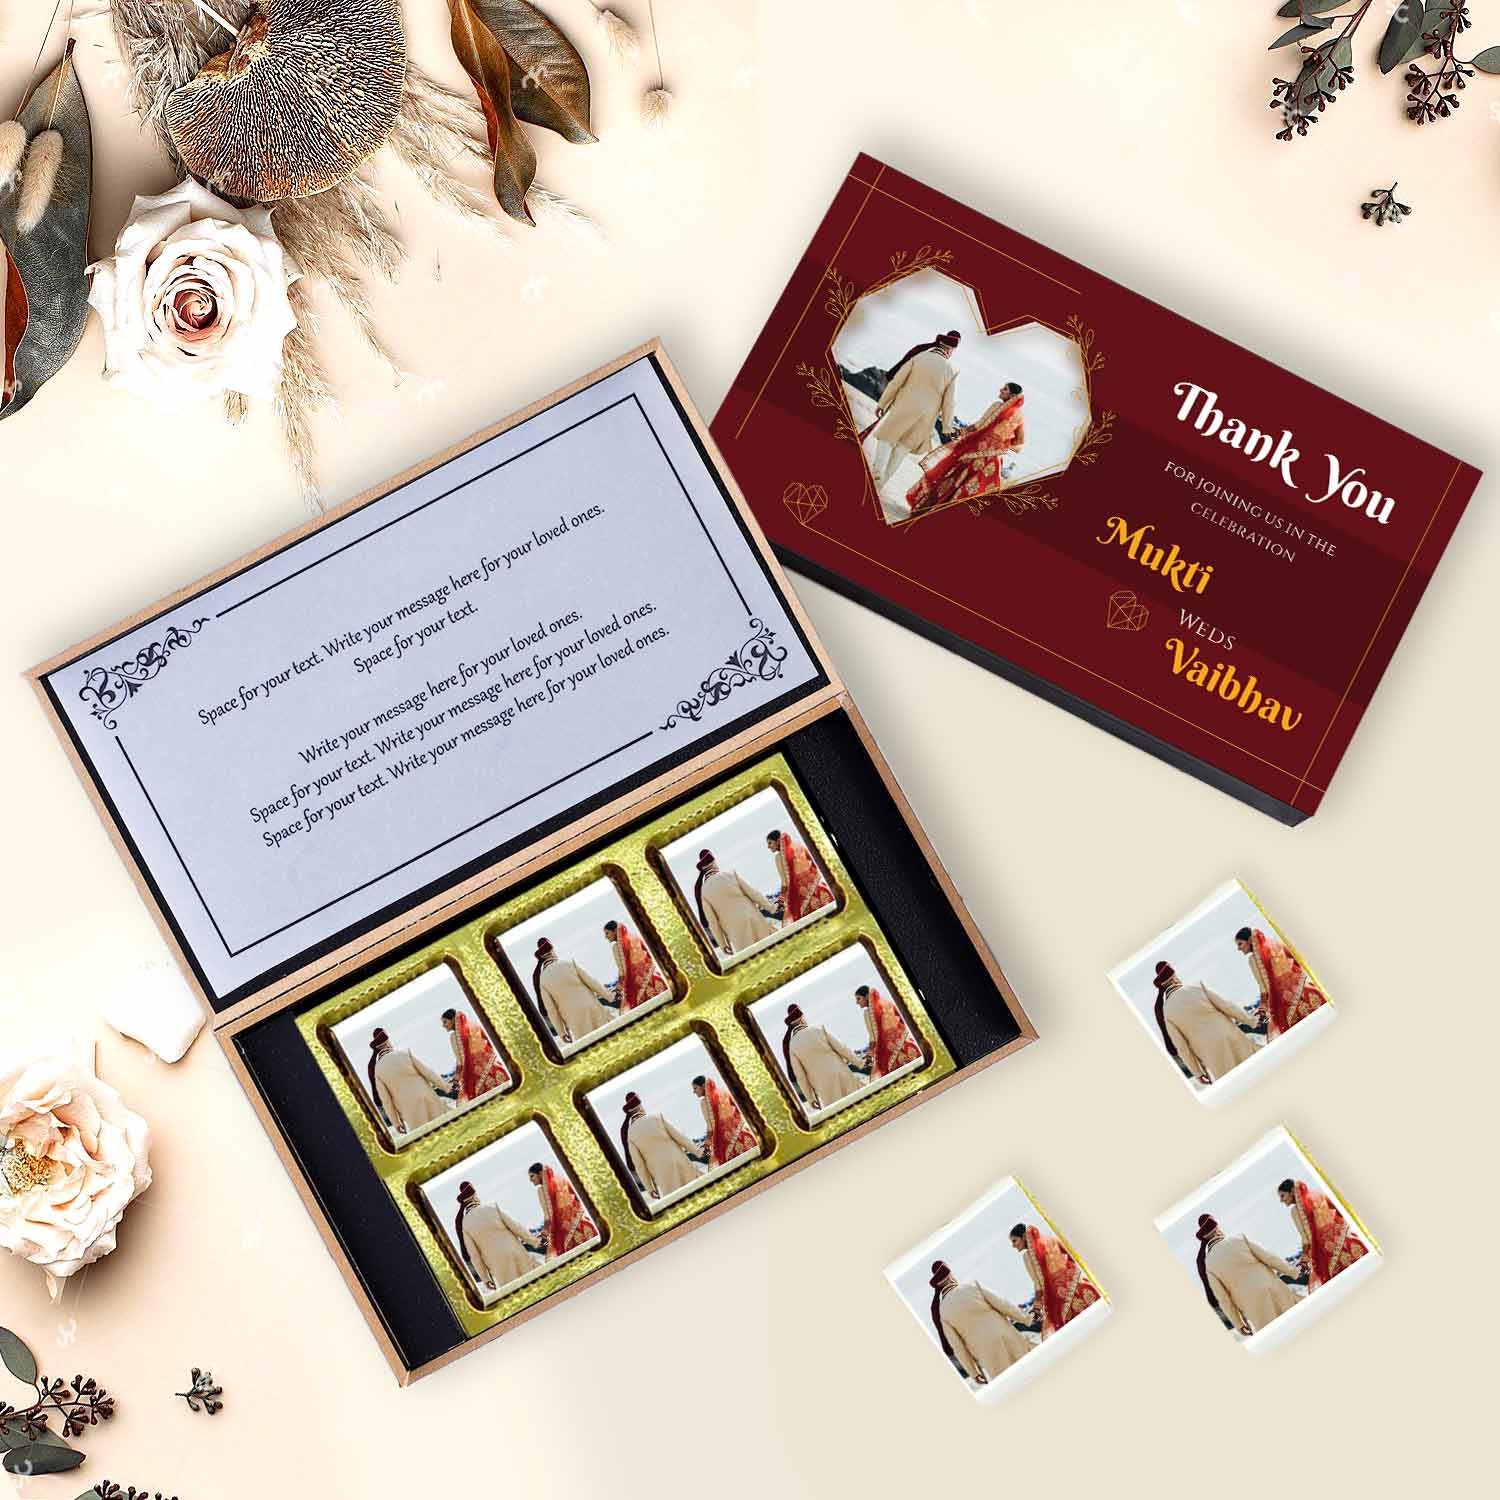 "Thank You" personalised wedding return gift chocolates. The Best Personalized Name Chocolate for Wedding Return Gifts